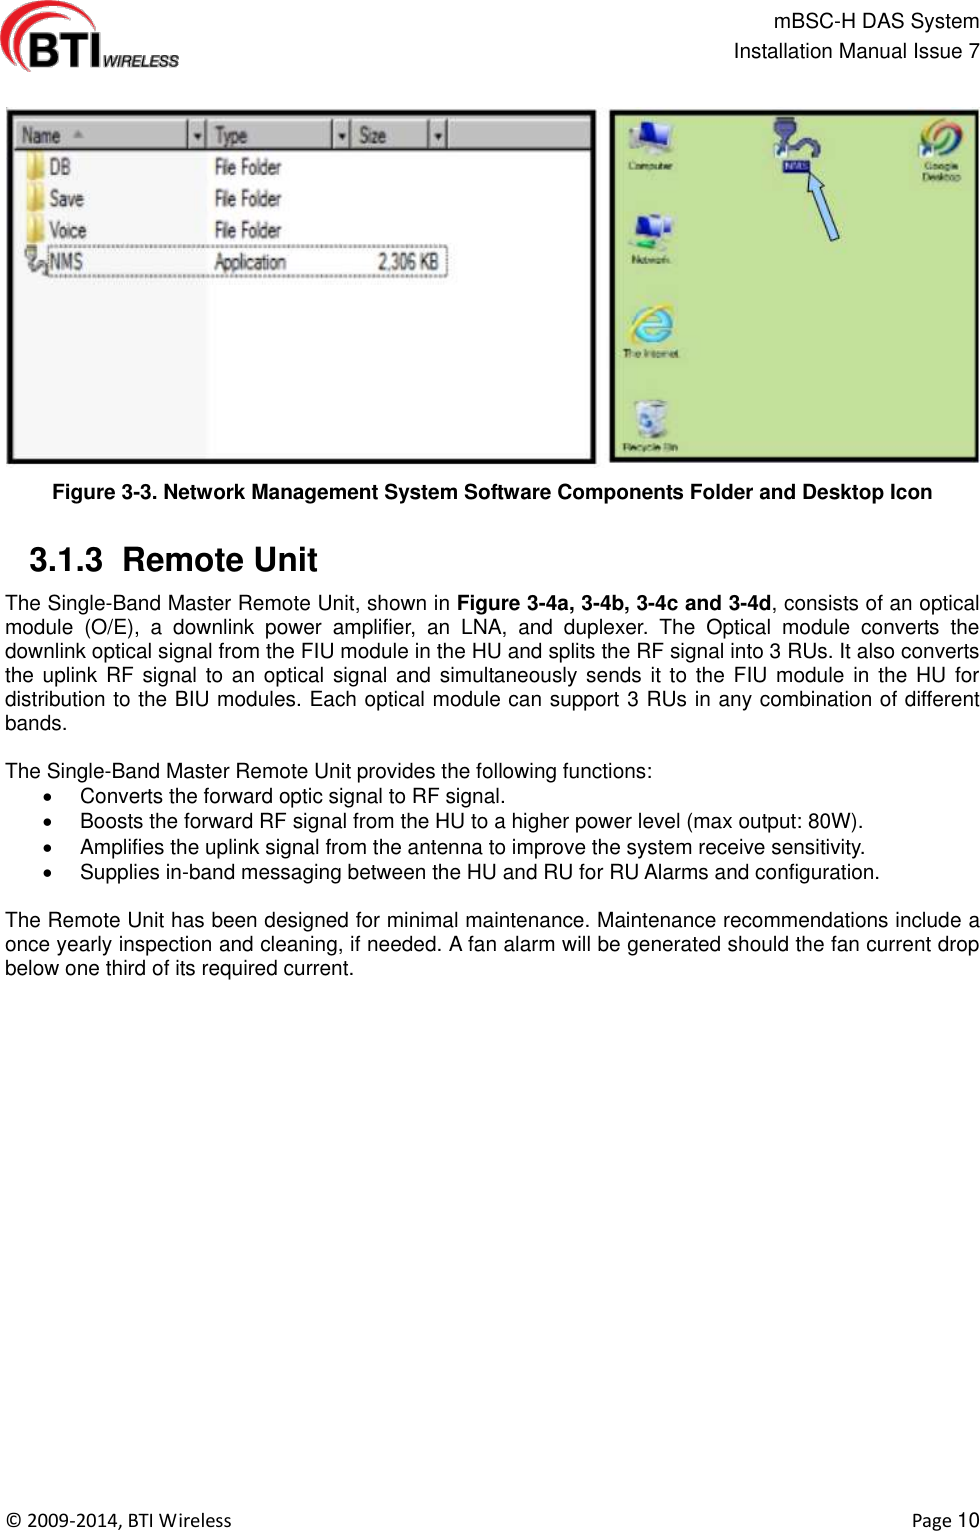                                                   mBSC-H DAS System   Installation Manual Issue 7  ©  2009-2014, BTI Wireless    Page 10  Figure 3-3. Network Management System Software Components Folder and Desktop Icon   3.1.3  Remote Unit The Single-Band Master Remote Unit, shown in Figure 3-4a, 3-4b, 3-4c and 3-4d, consists of an optical module  (O/E),  a  downlink  power  amplifier,  an  LNA,  and  duplexer.  The  Optical  module  converts  the downlink optical signal from the FIU module in the HU and splits the RF signal into 3 RUs. It also converts the uplink  RF signal  to an  optical signal and simultaneously sends  it to  the FIU module in  the HU for distribution to the BIU modules. Each optical module can support 3 RUs in any combination of different bands.  The Single-Band Master Remote Unit provides the following functions:   Converts the forward optic signal to RF signal.   Boosts the forward RF signal from the HU to a higher power level (max output: 80W).   Amplifies the uplink signal from the antenna to improve the system receive sensitivity.   Supplies in-band messaging between the HU and RU for RU Alarms and configuration.  The Remote Unit has been designed for minimal maintenance. Maintenance recommendations include a once yearly inspection and cleaning, if needed. A fan alarm will be generated should the fan current drop below one third of its required current.  